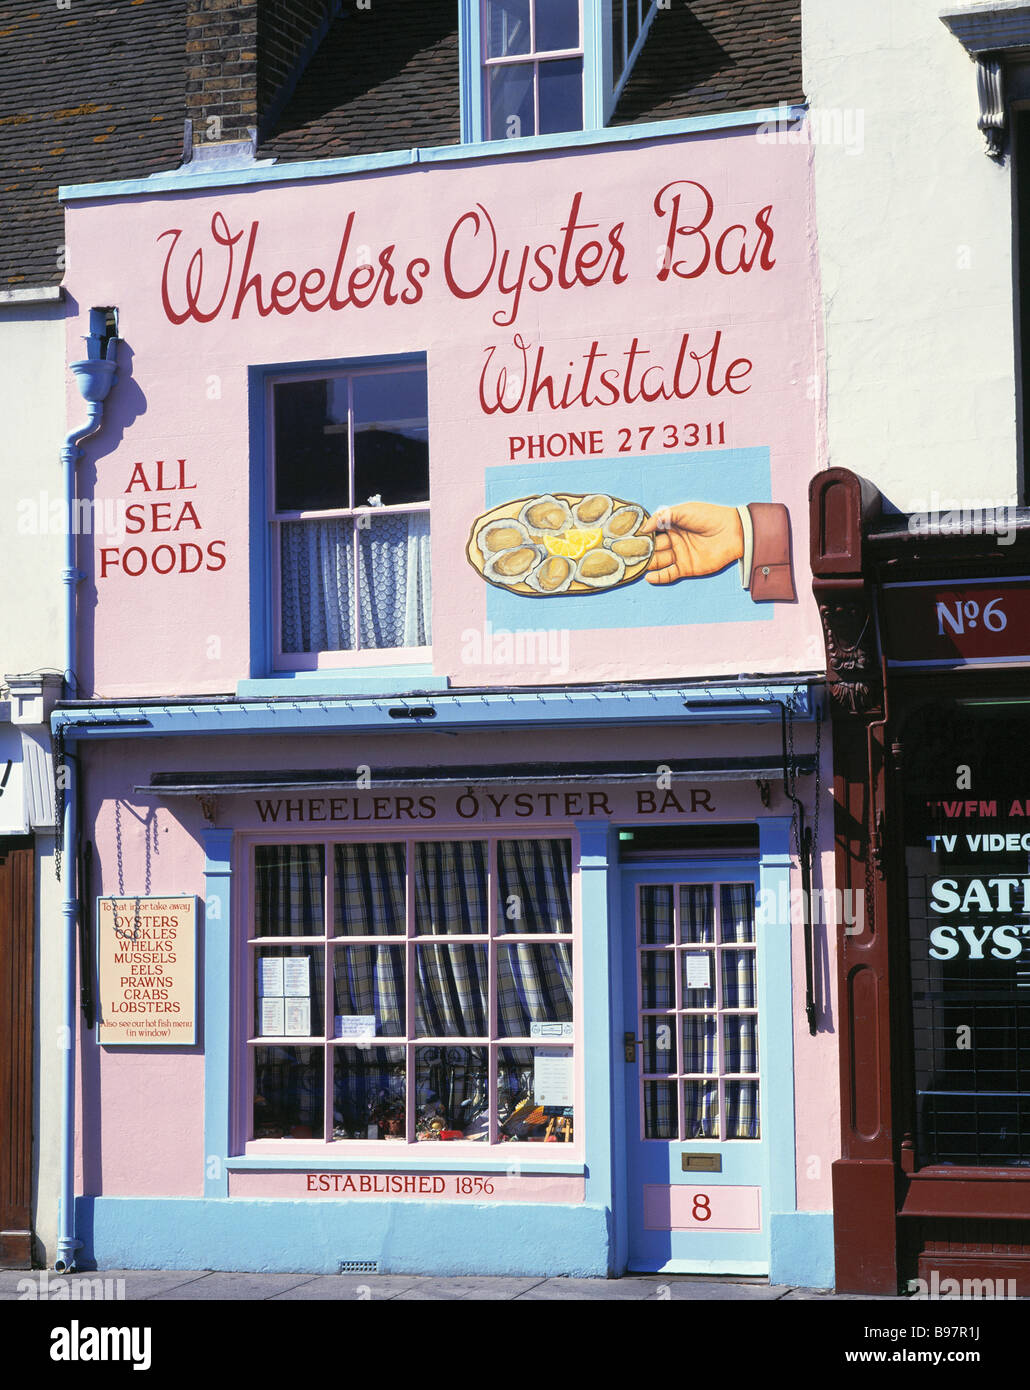 Go WHITSTABLE KENT WHEELERS OYSTER BAR Banque D'Images